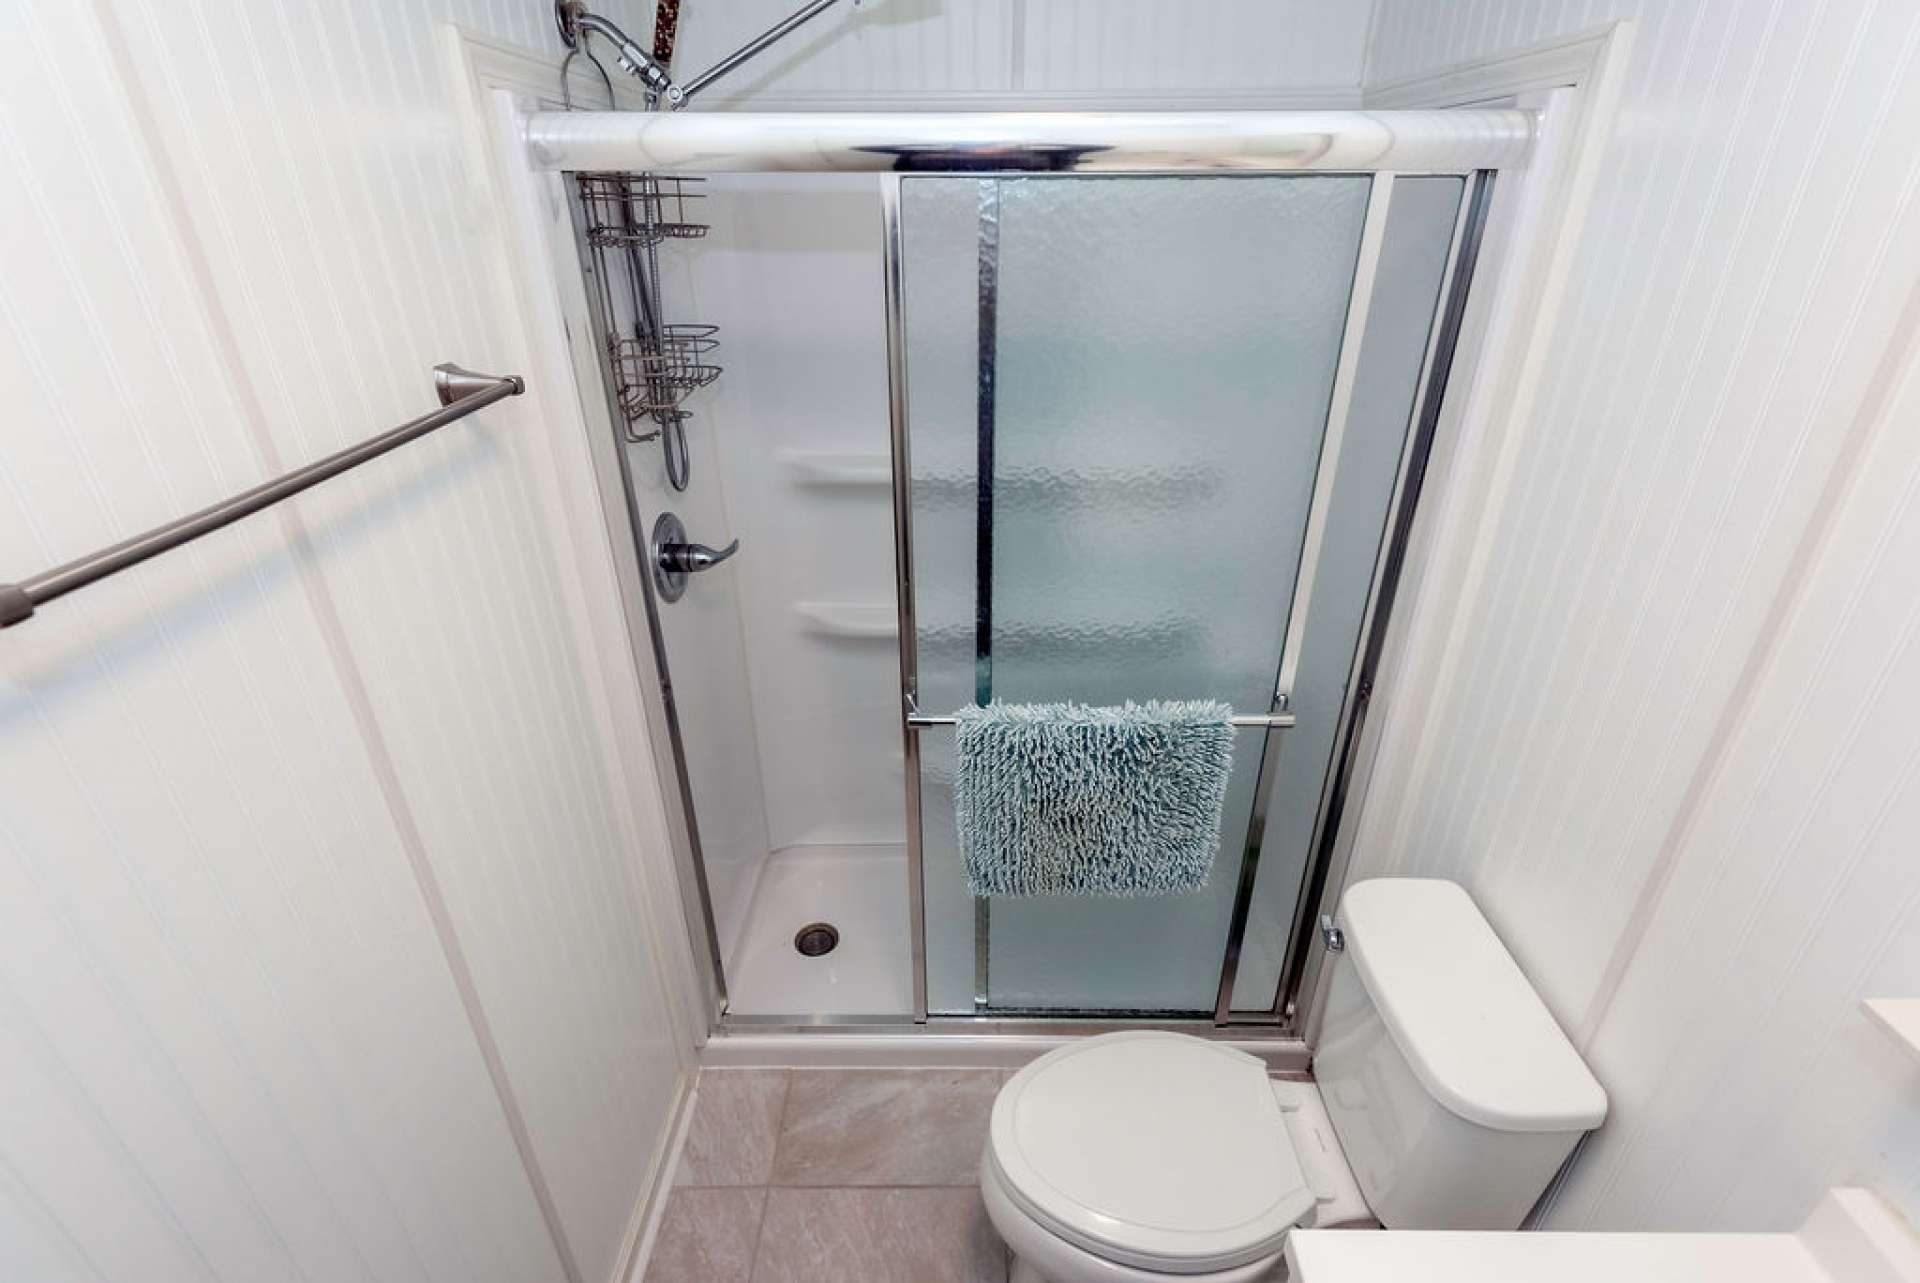 The second full bath has a walk-in shower.